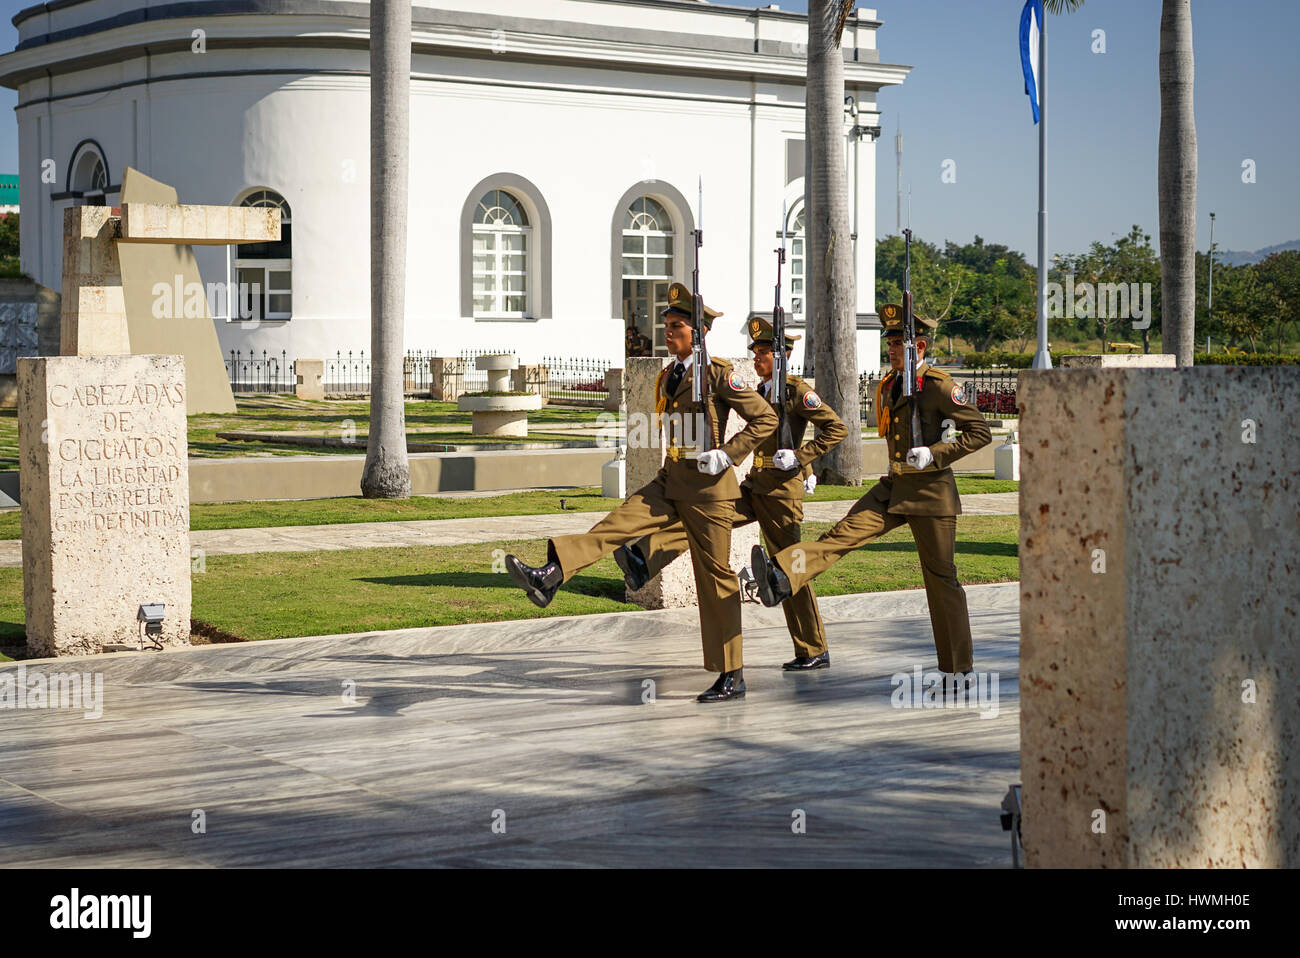 Santiago de Cuba, Cuba - January 10, 2016: Guard mounting or changing the guard at the Mausoleum of Jose Marti in the cemetery of Santa Ifigenia in Sa Stock Photo